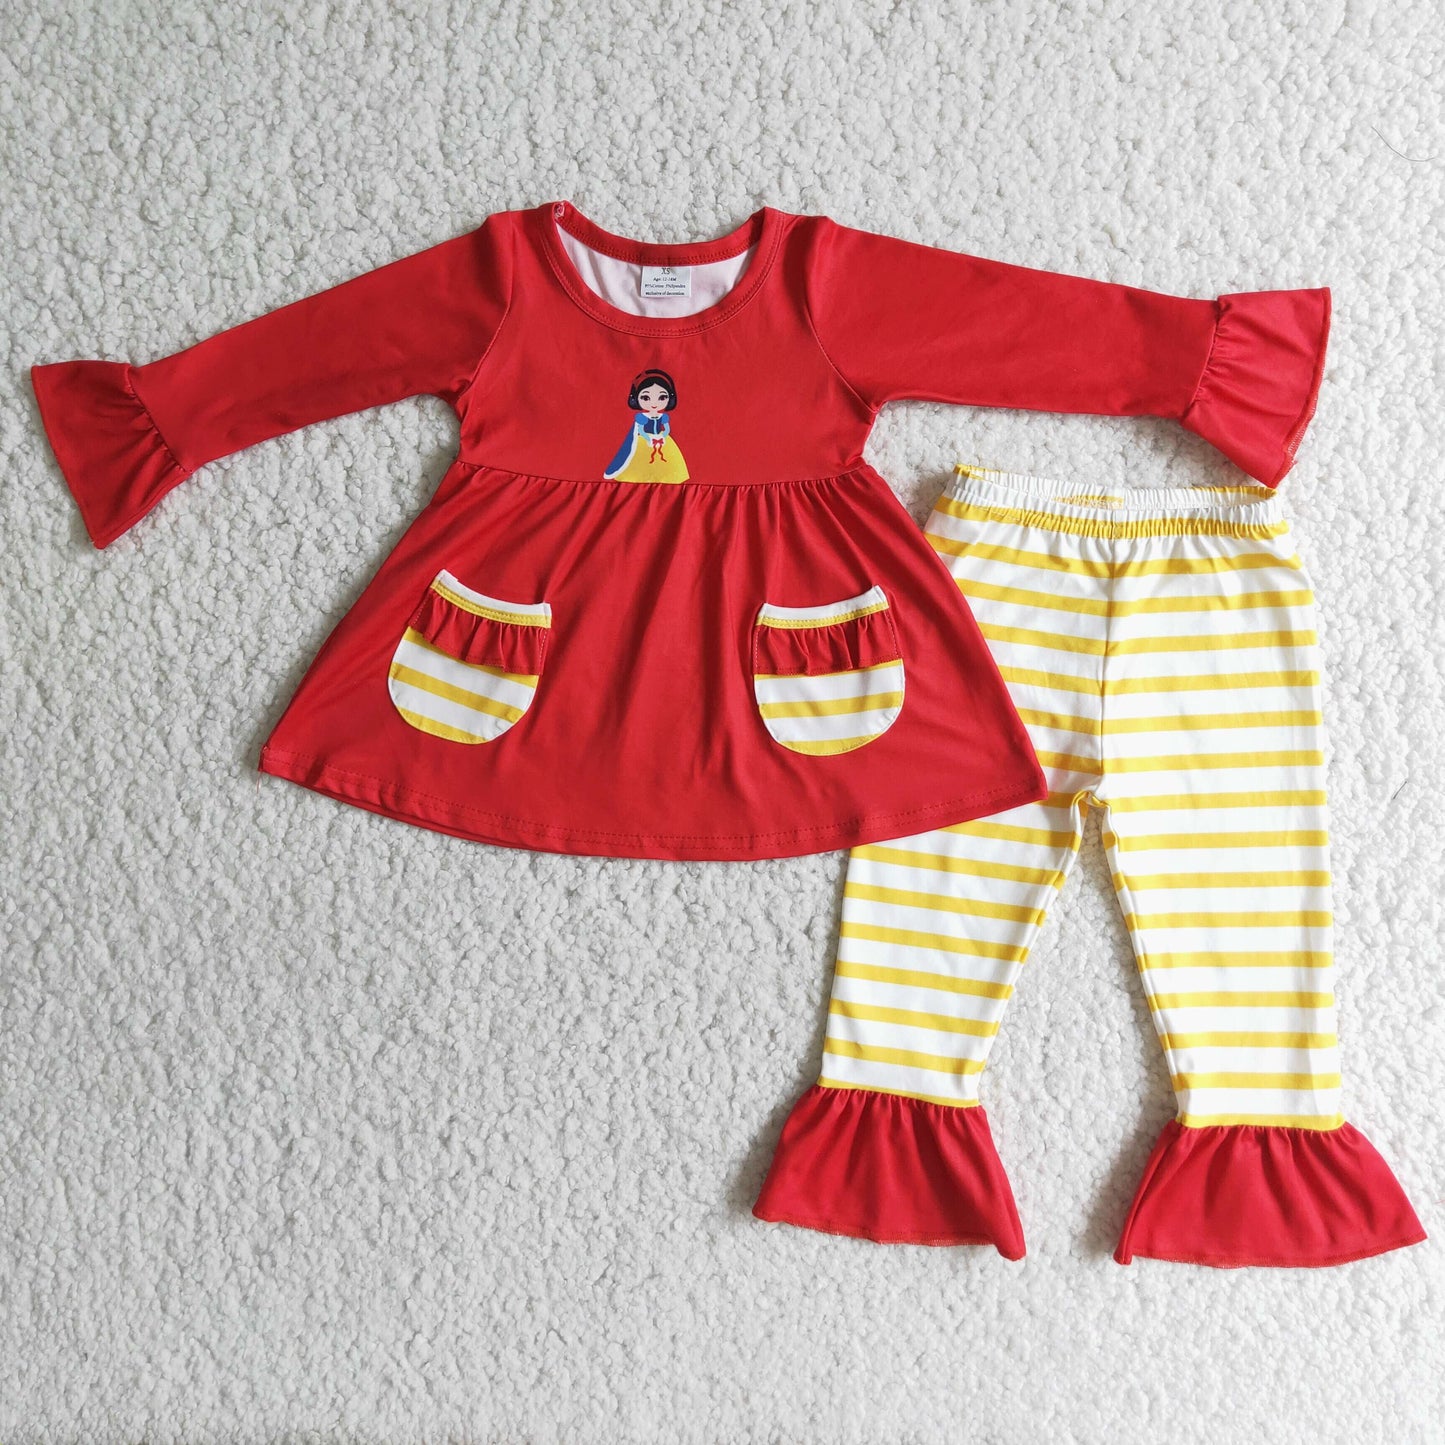 Red pocket tunic stripe pants princess girls boutique outfits